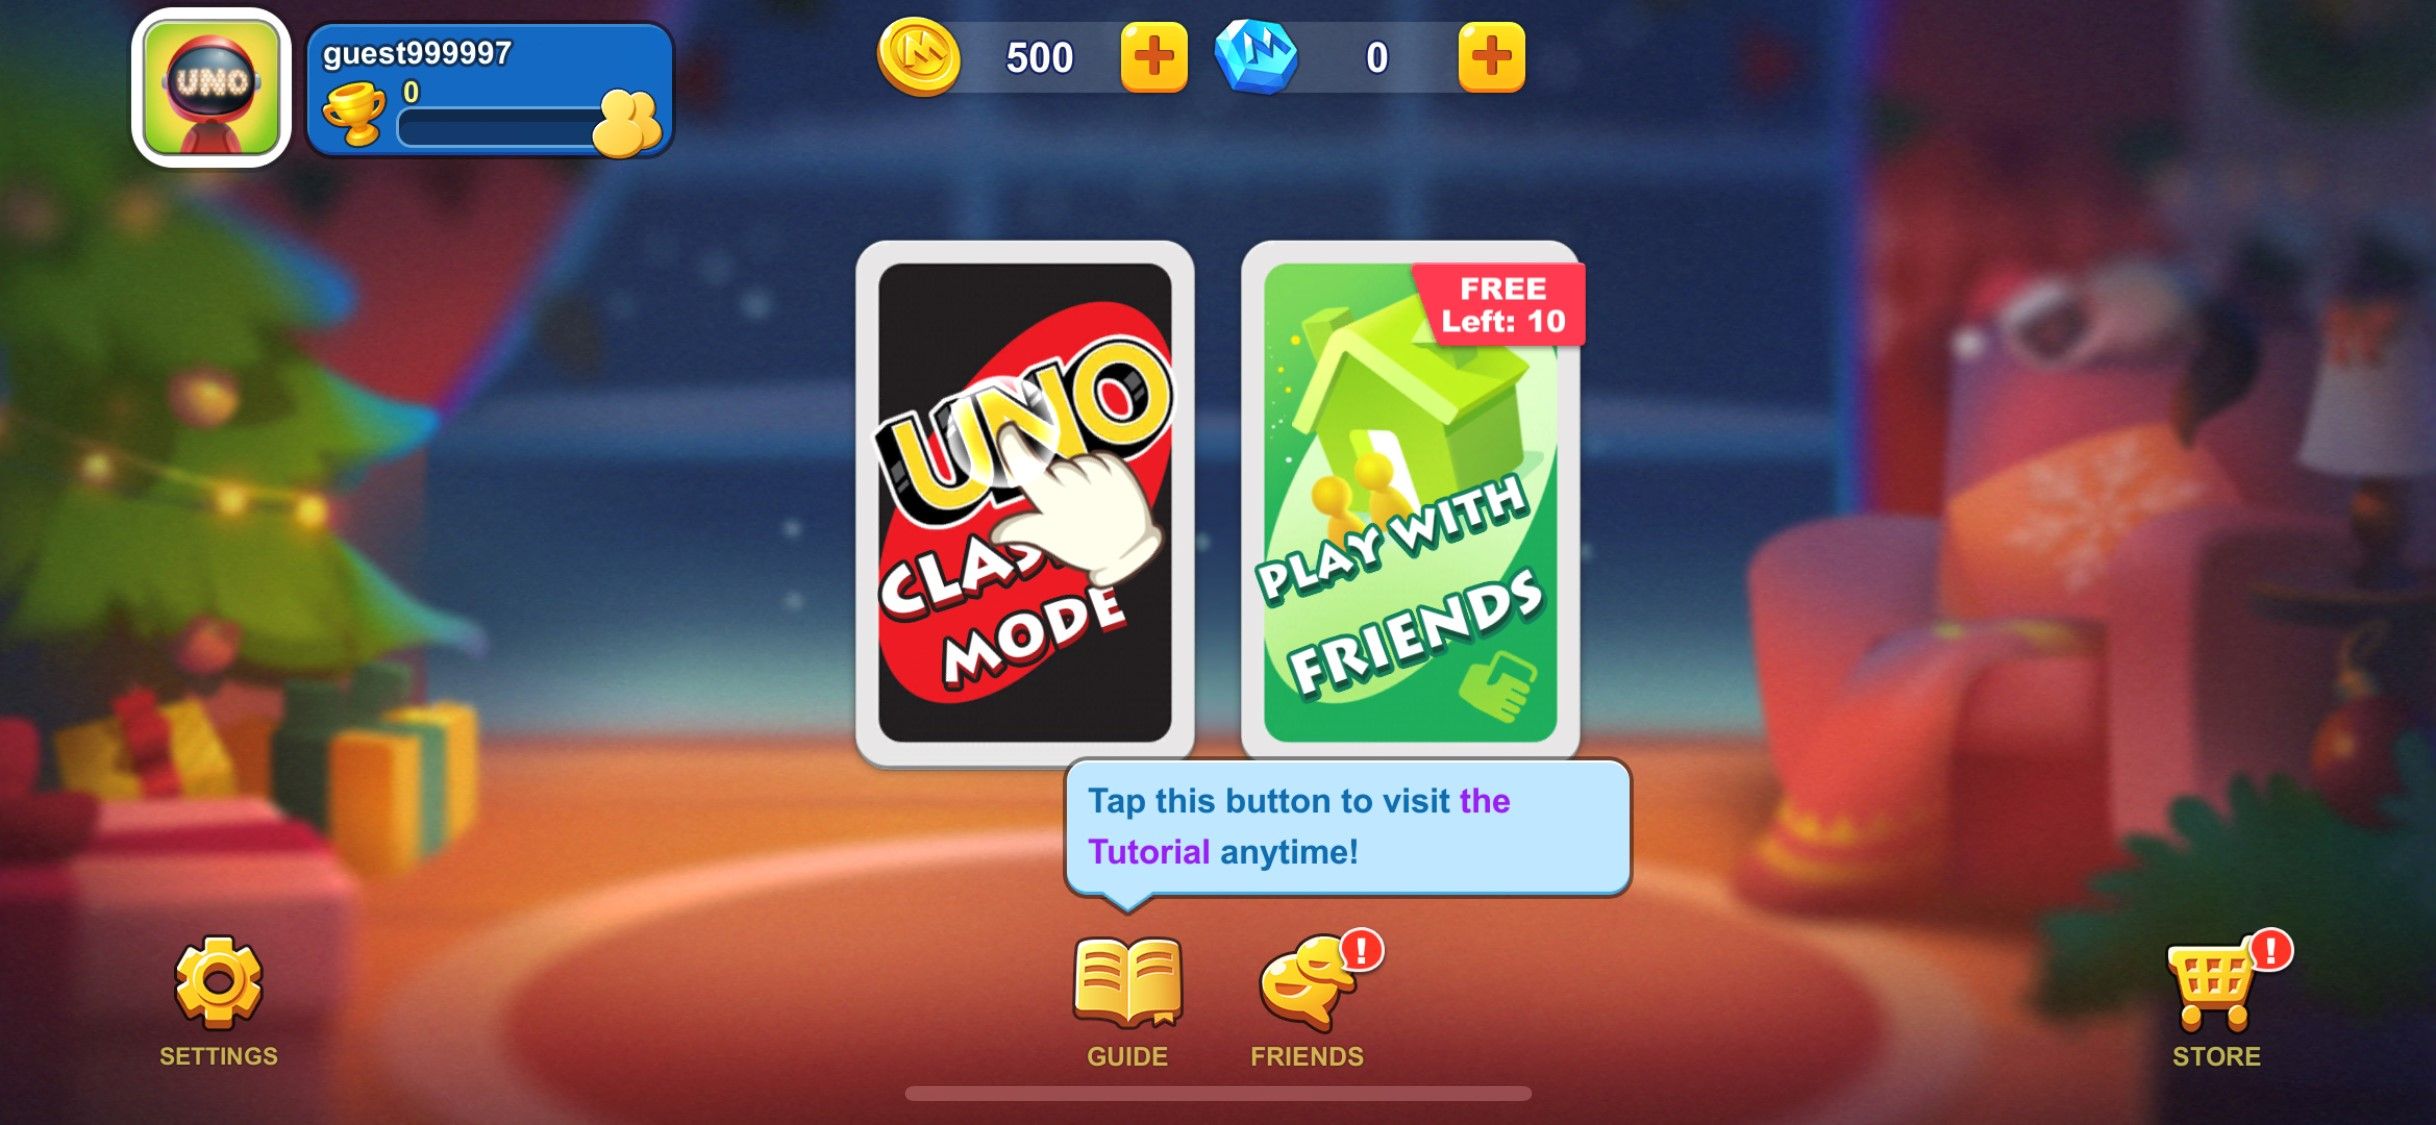 ONE!  Mobile Classic mode or with friends